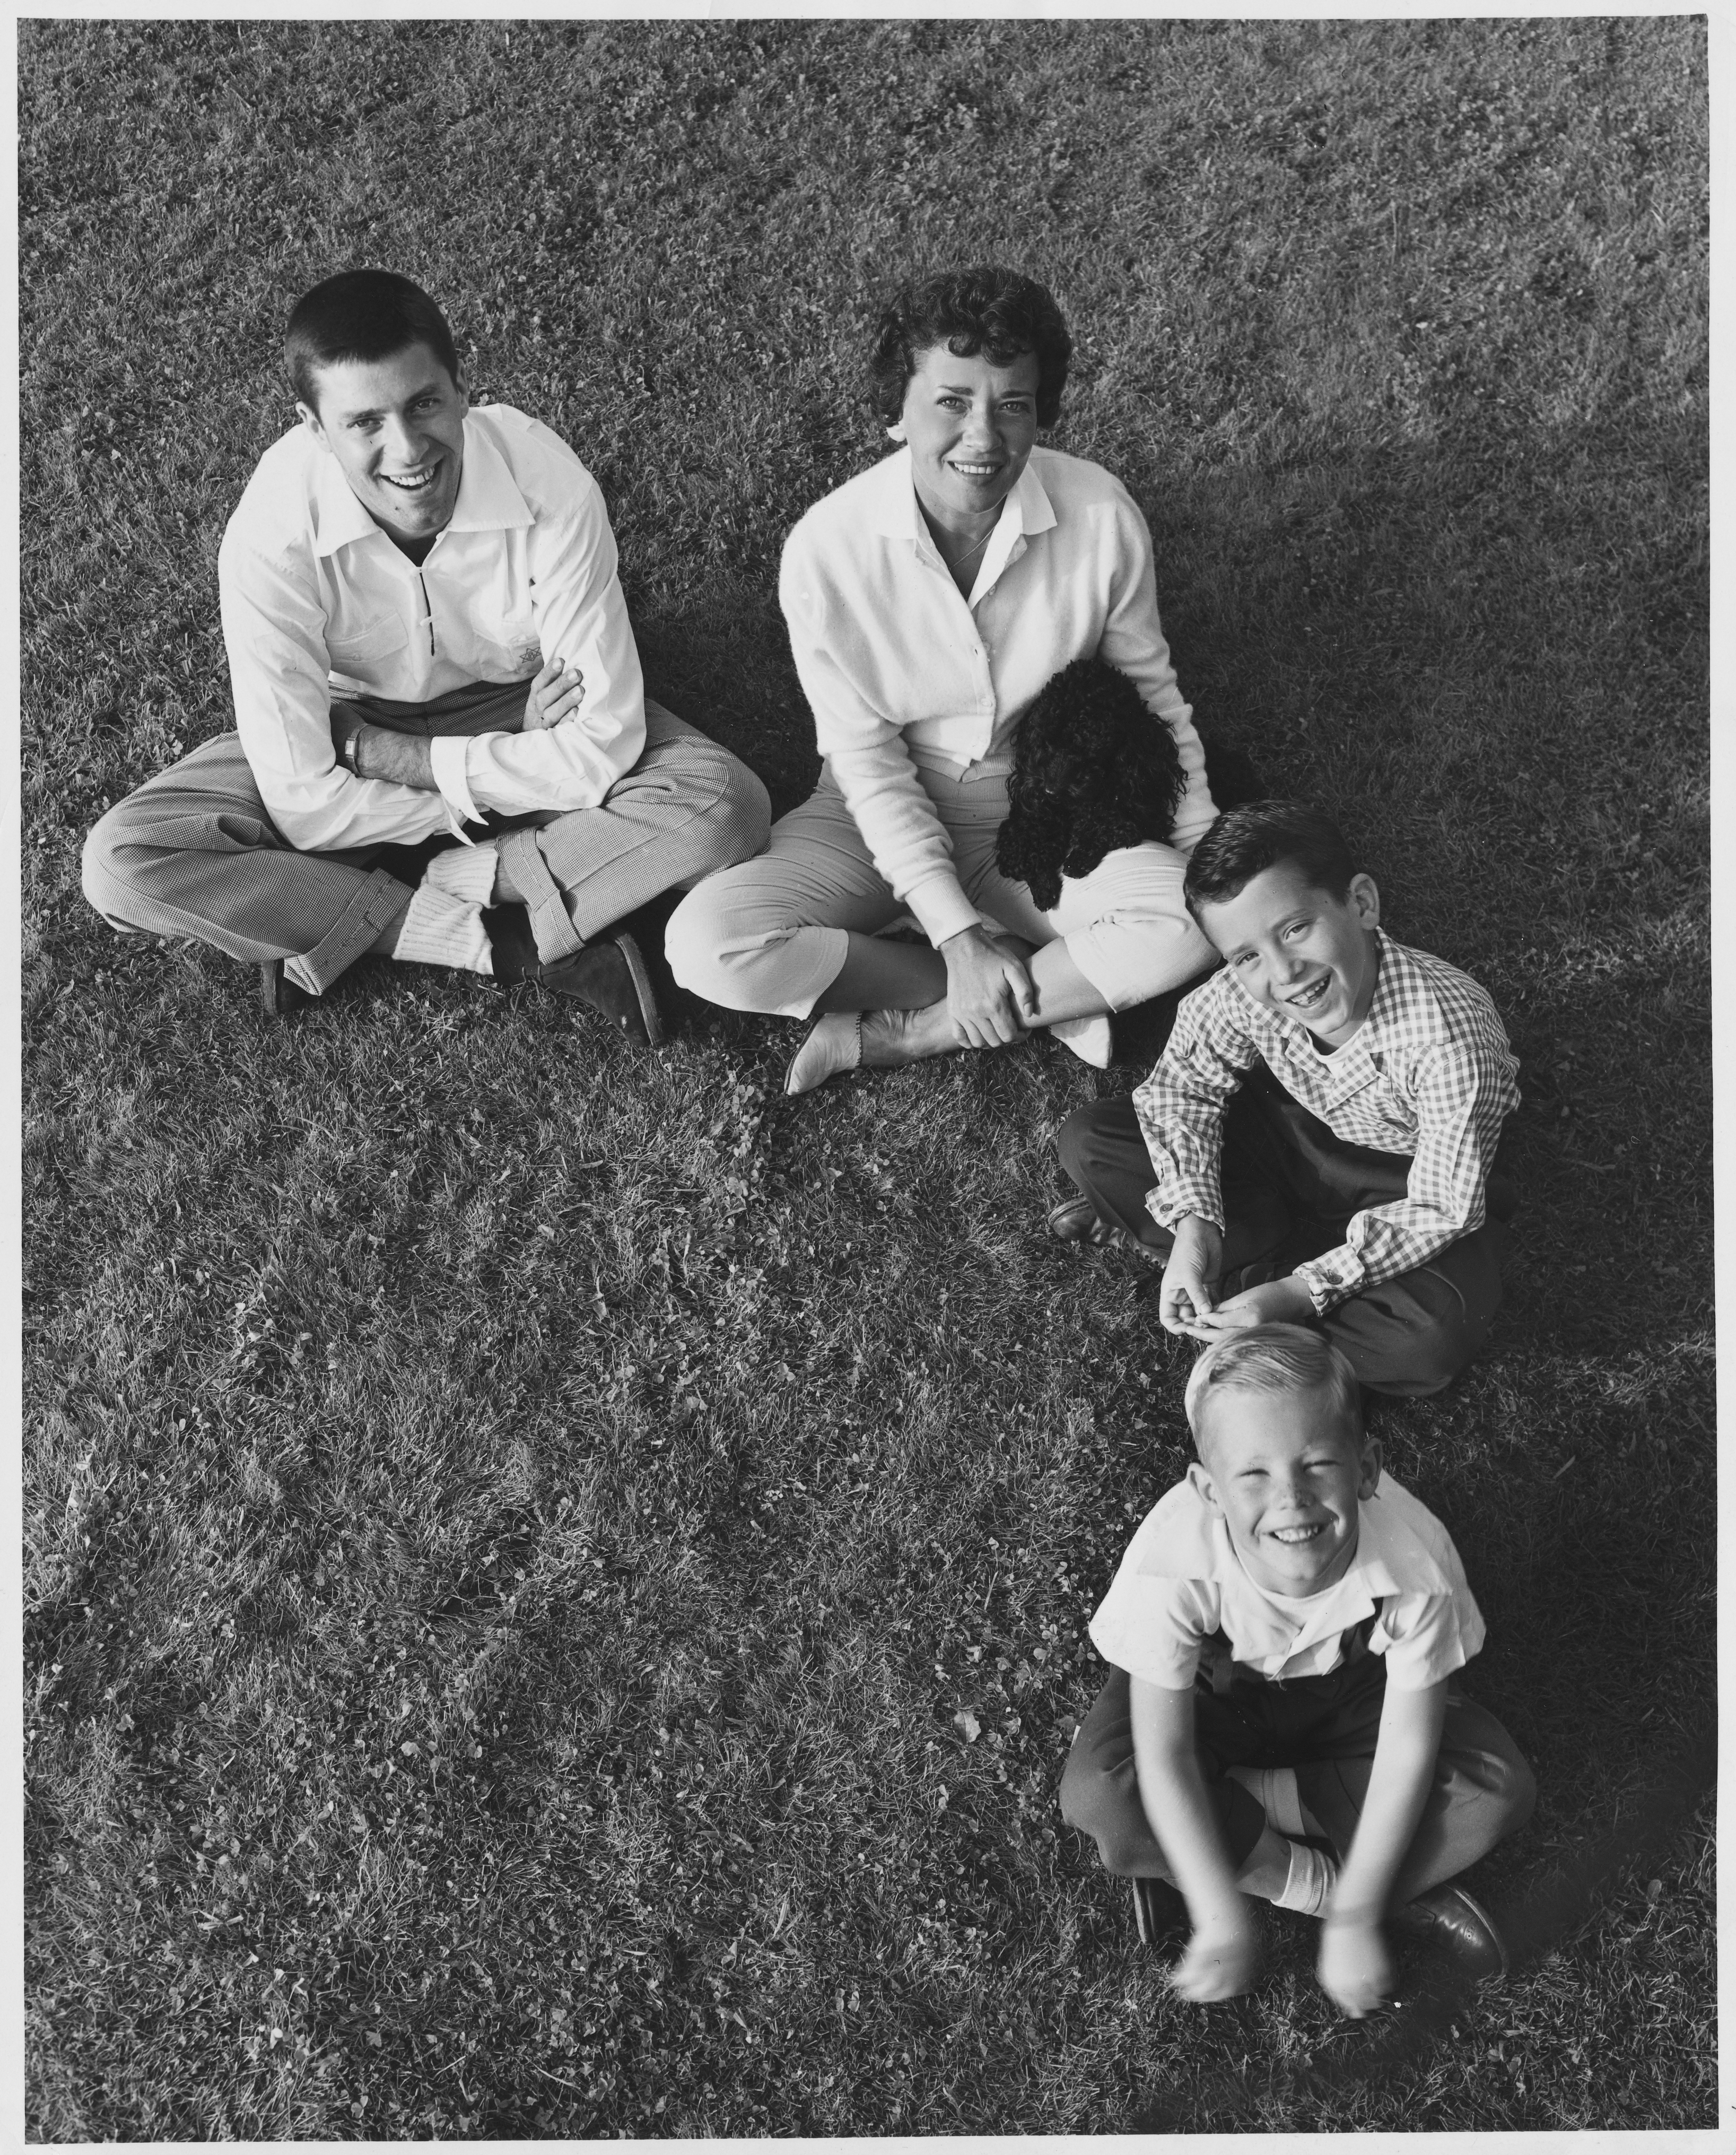 Comedian Jerry Lewis sits on the grass with his wife Patti and their sons Gary and Ron | Source: Getty Images